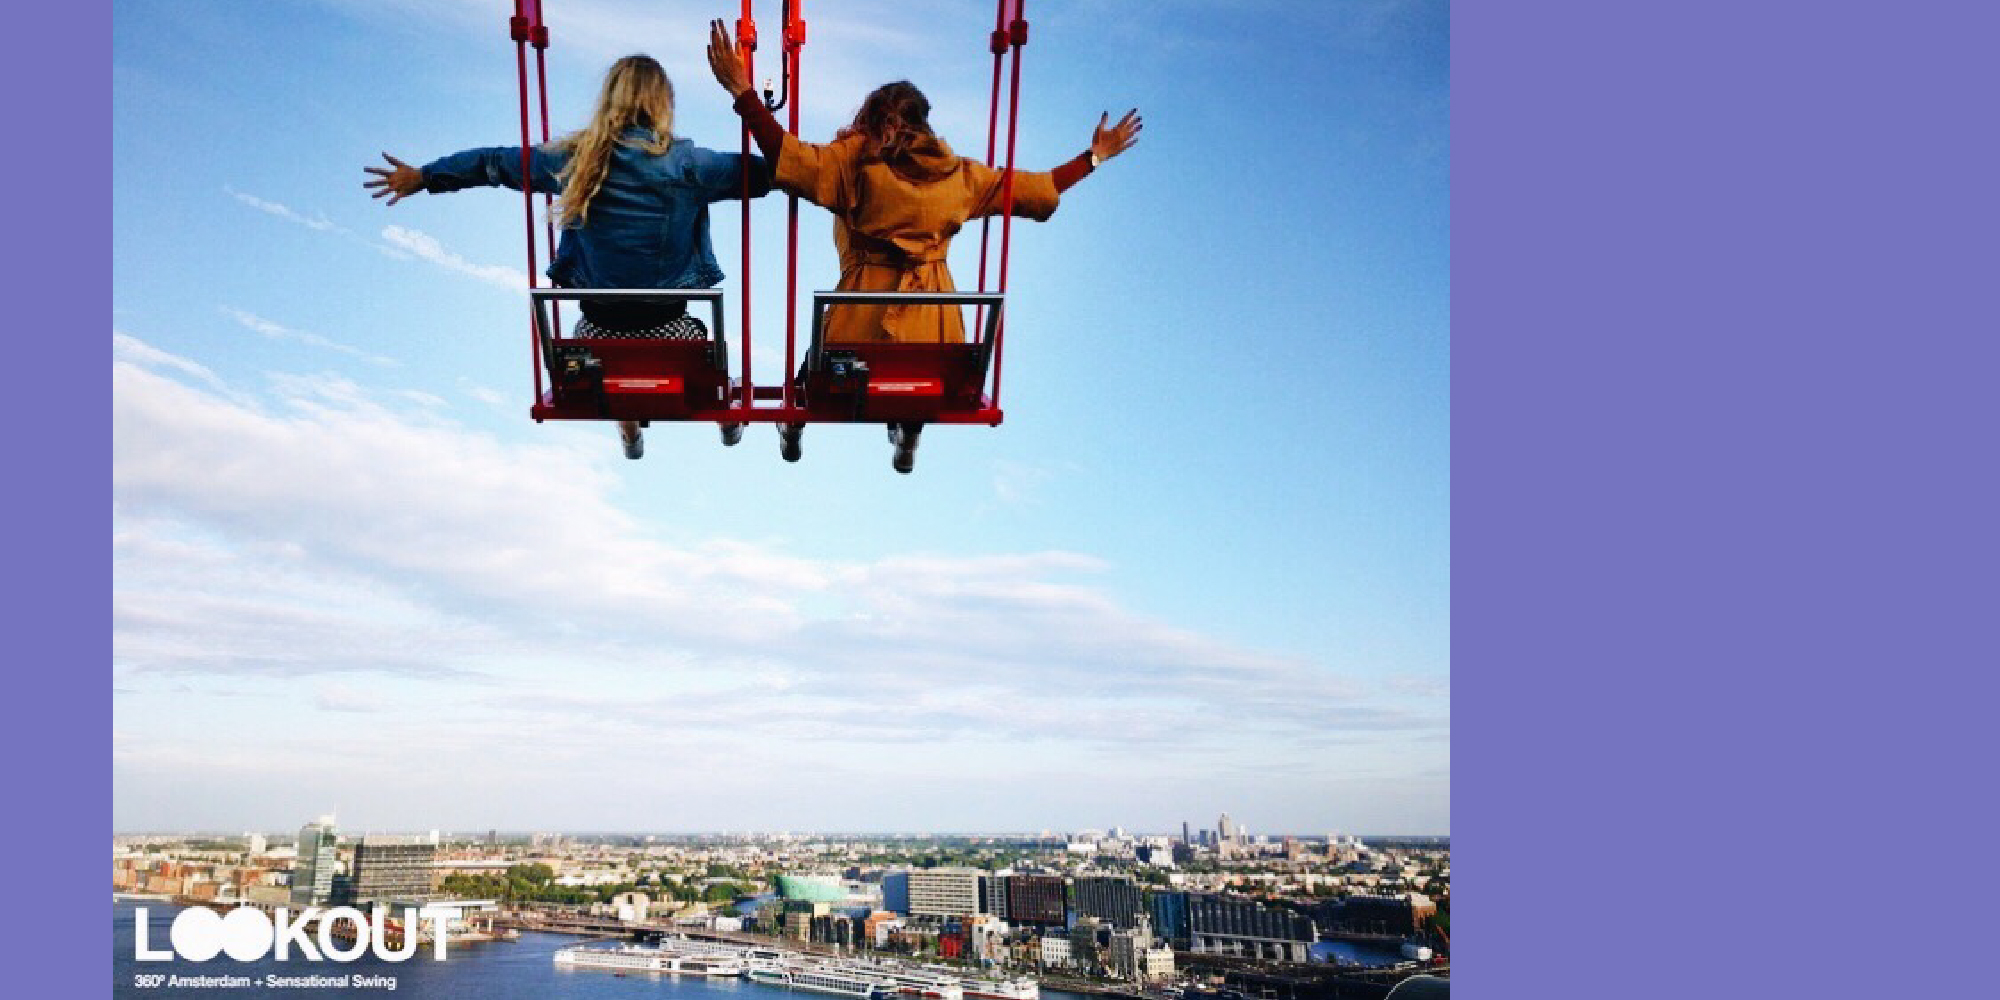 Annika Lautens sitting on a swing with her friend looking over Amsterdam during exchange at Amsterdam Fashion Institute